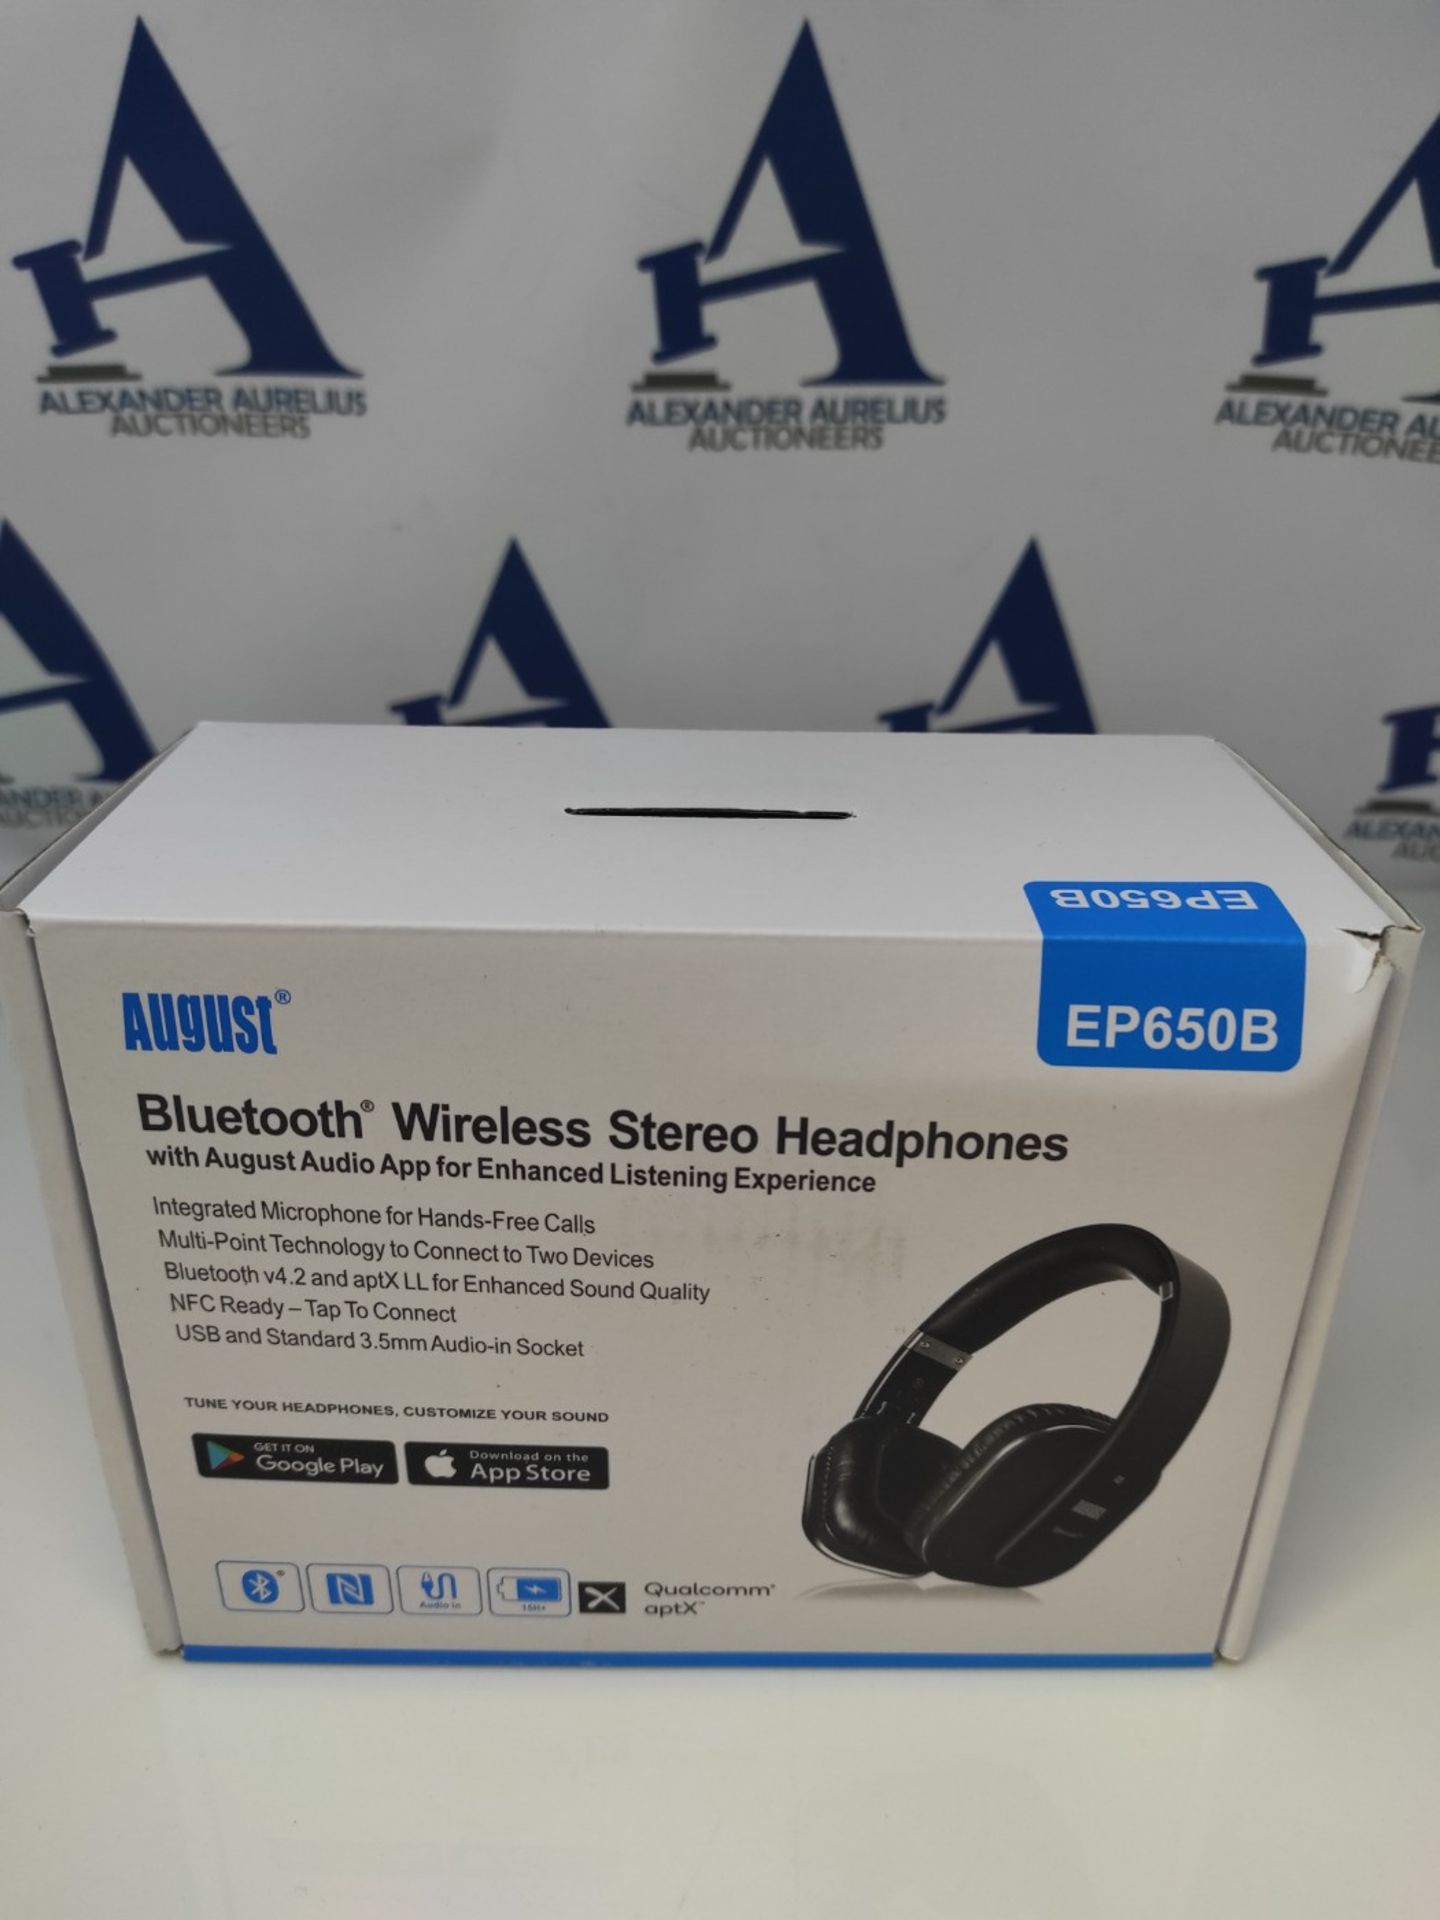 Wireless Bluetooth Headset 4.2 aptX Low Latency - August EP650 - Over Ear, Lightweight - Image 5 of 6